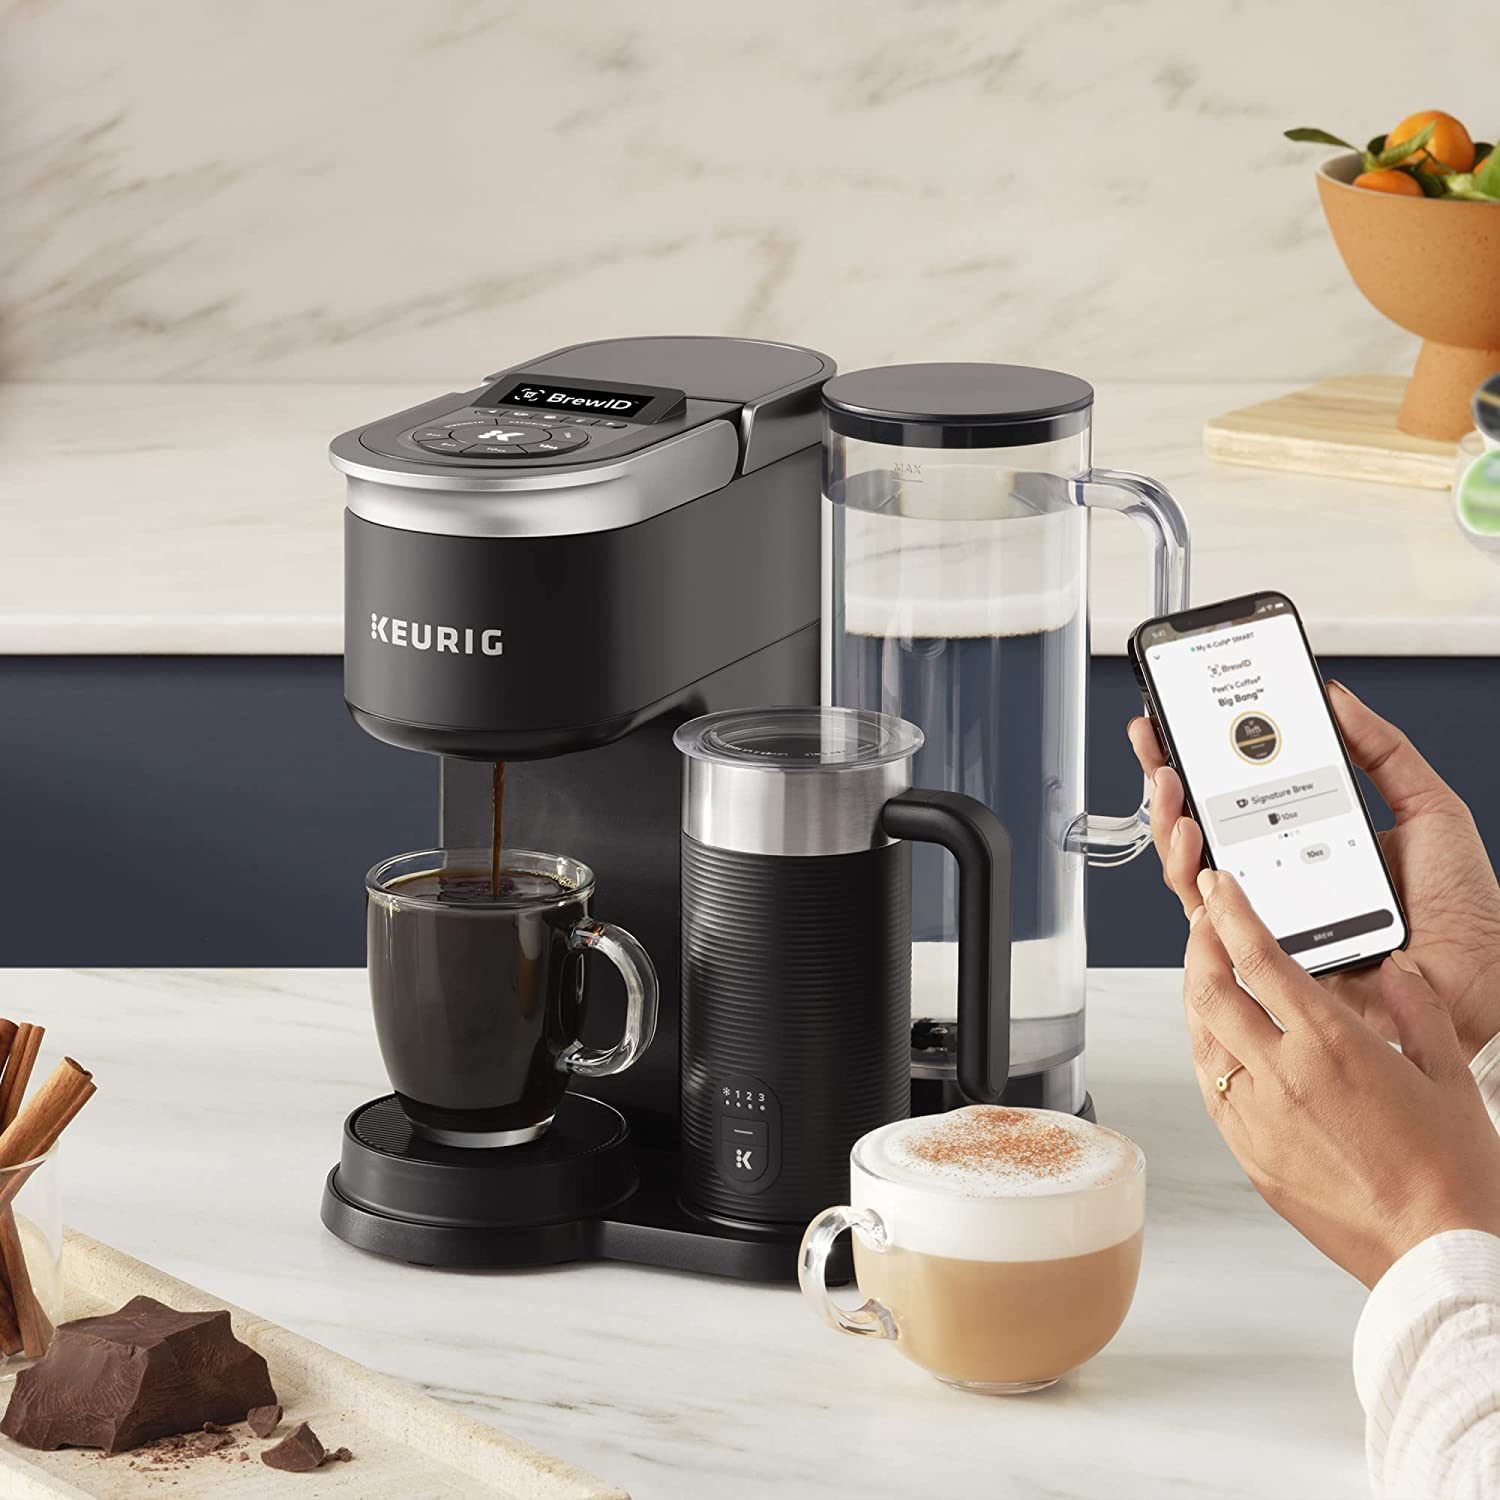 The 7 Best Coffee Makers of 2023